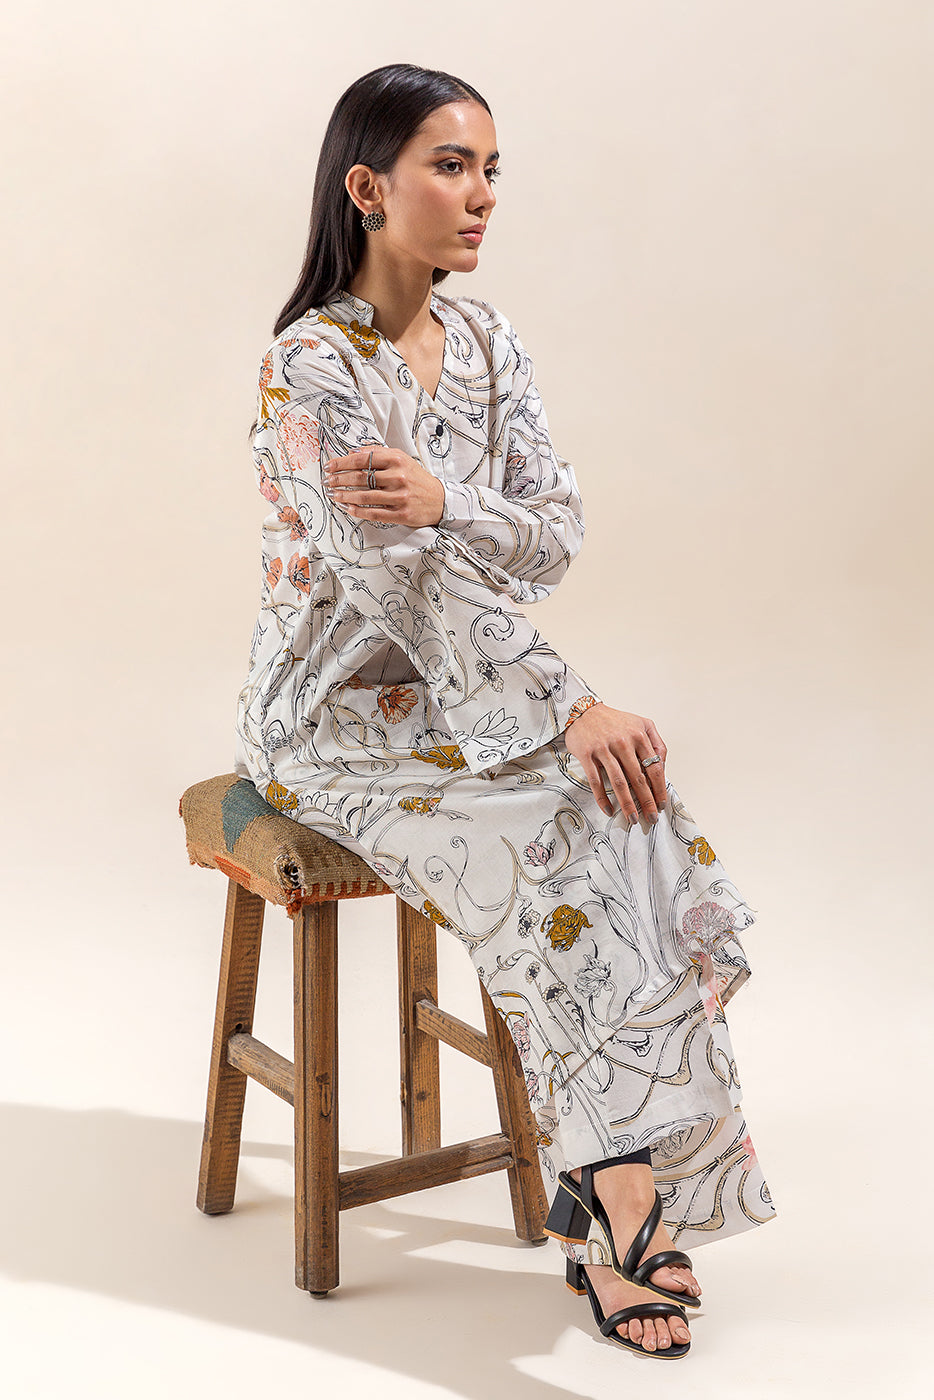 2 PIECE PRINTED LAWN SUIT-HAZY AFFAIR (UNSTITCHED) - BEECHTREE